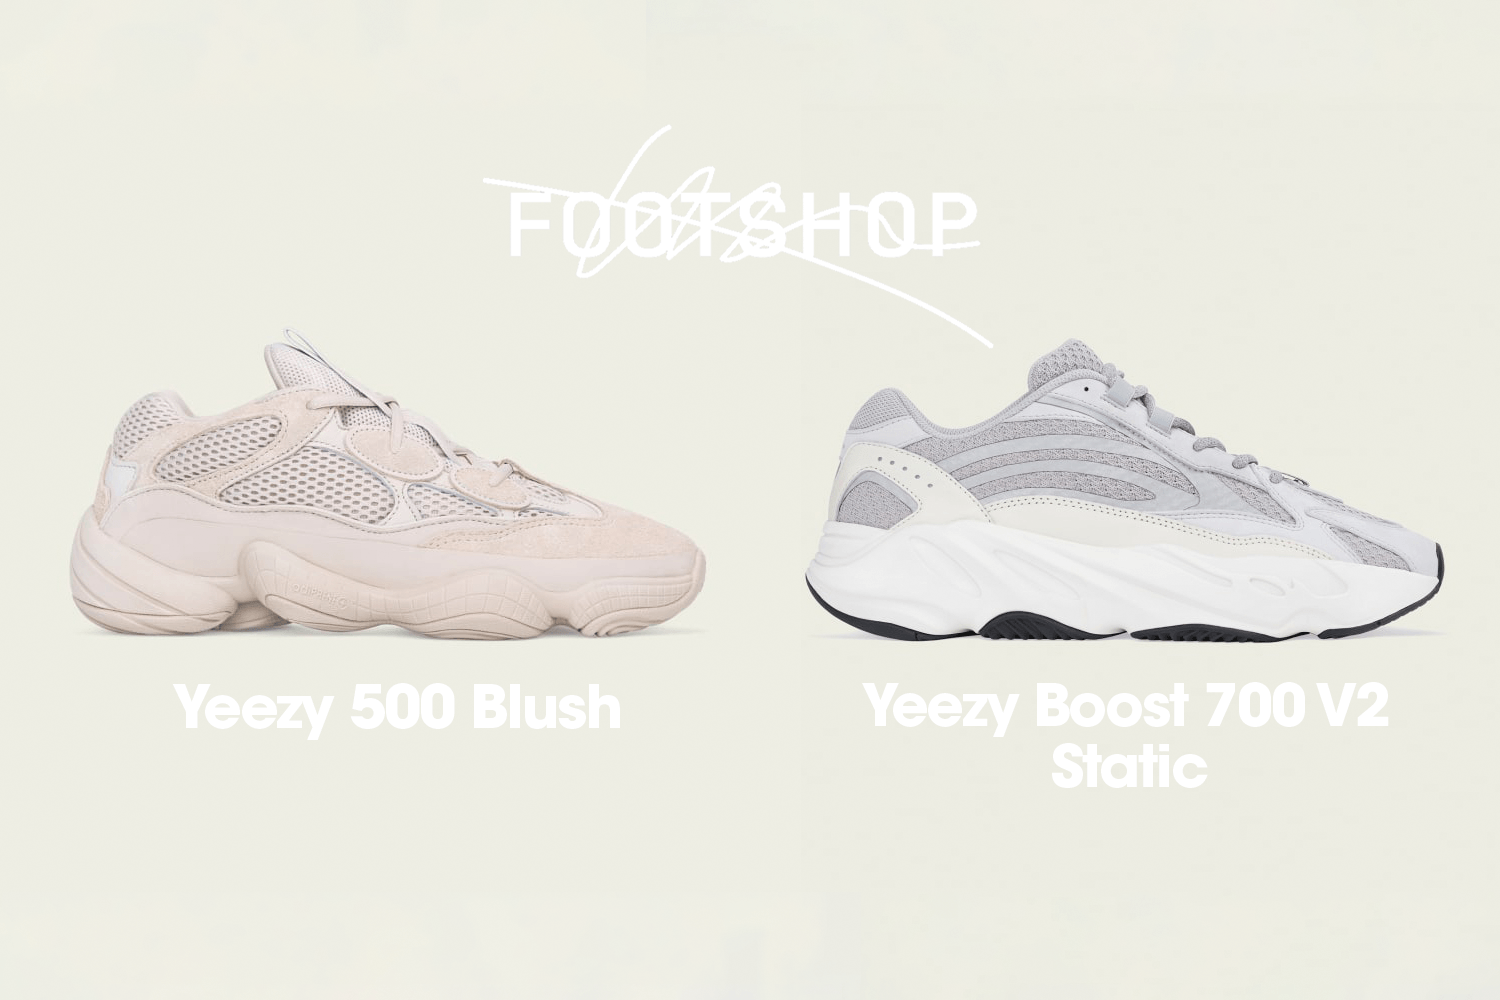 Yeezy 500 'Blush' and Yeezy 700 'Static' get a restock at Footshop